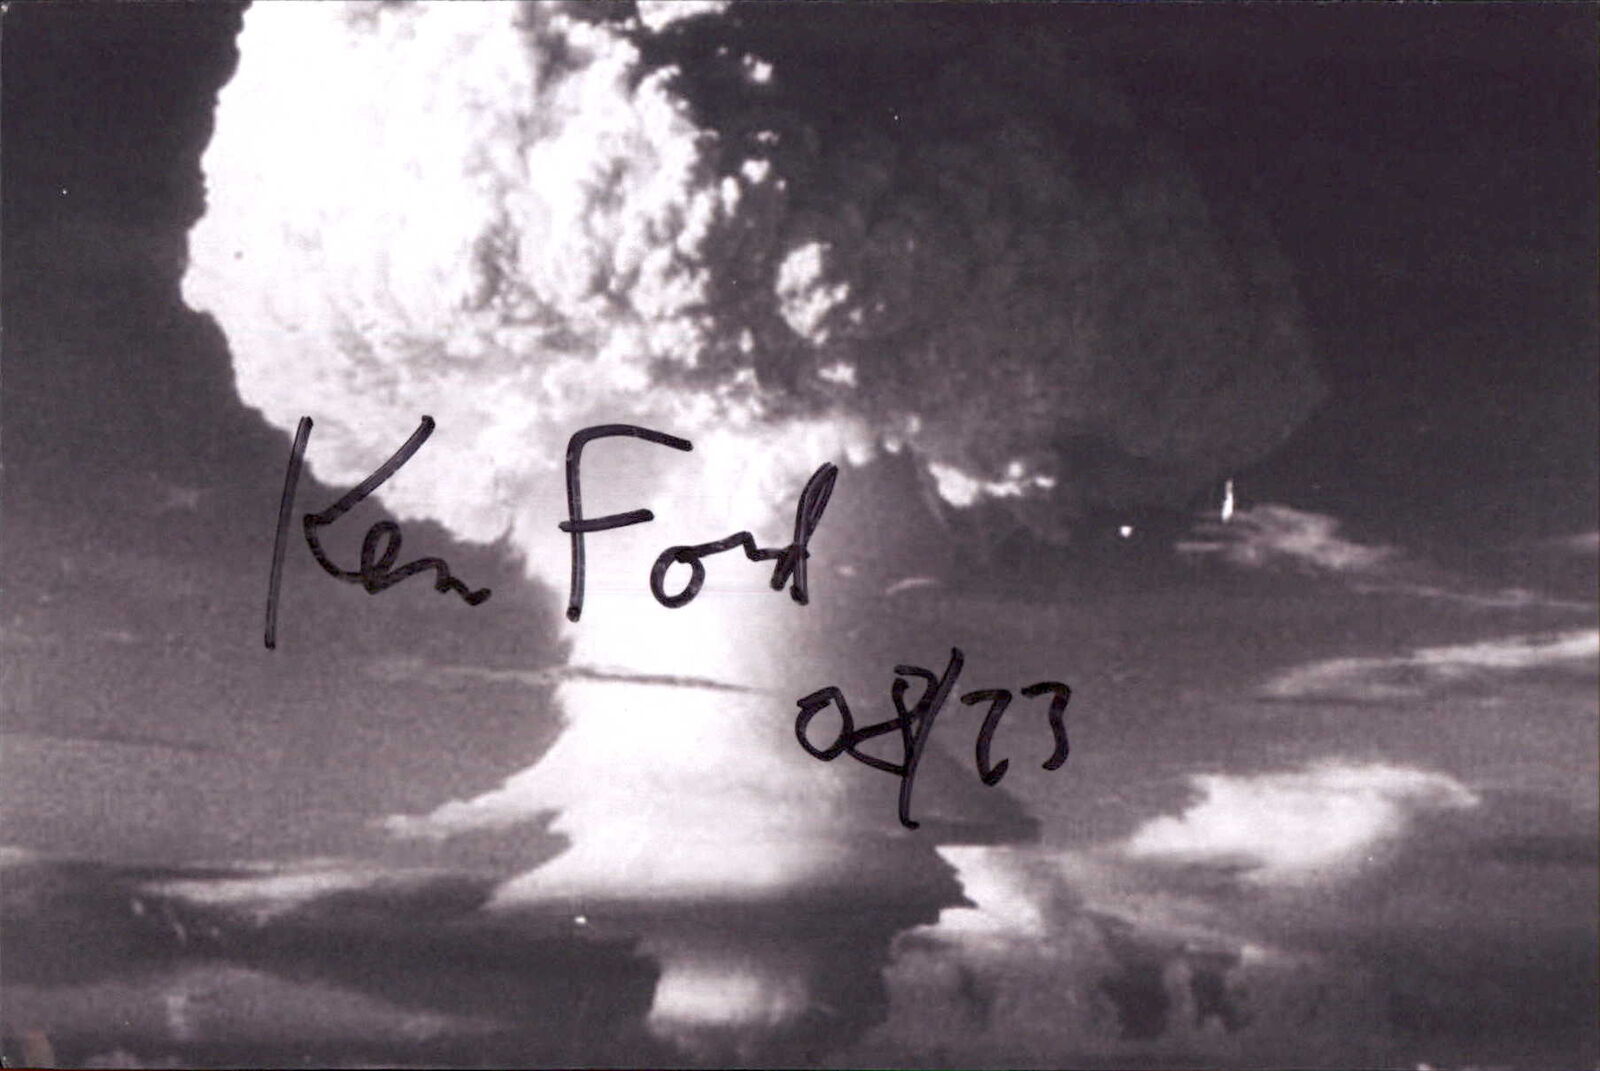 Kenneth W Ford Signed 4x6 Photo Physicist Developed H-Bomb Hydrogen WW2 WWII